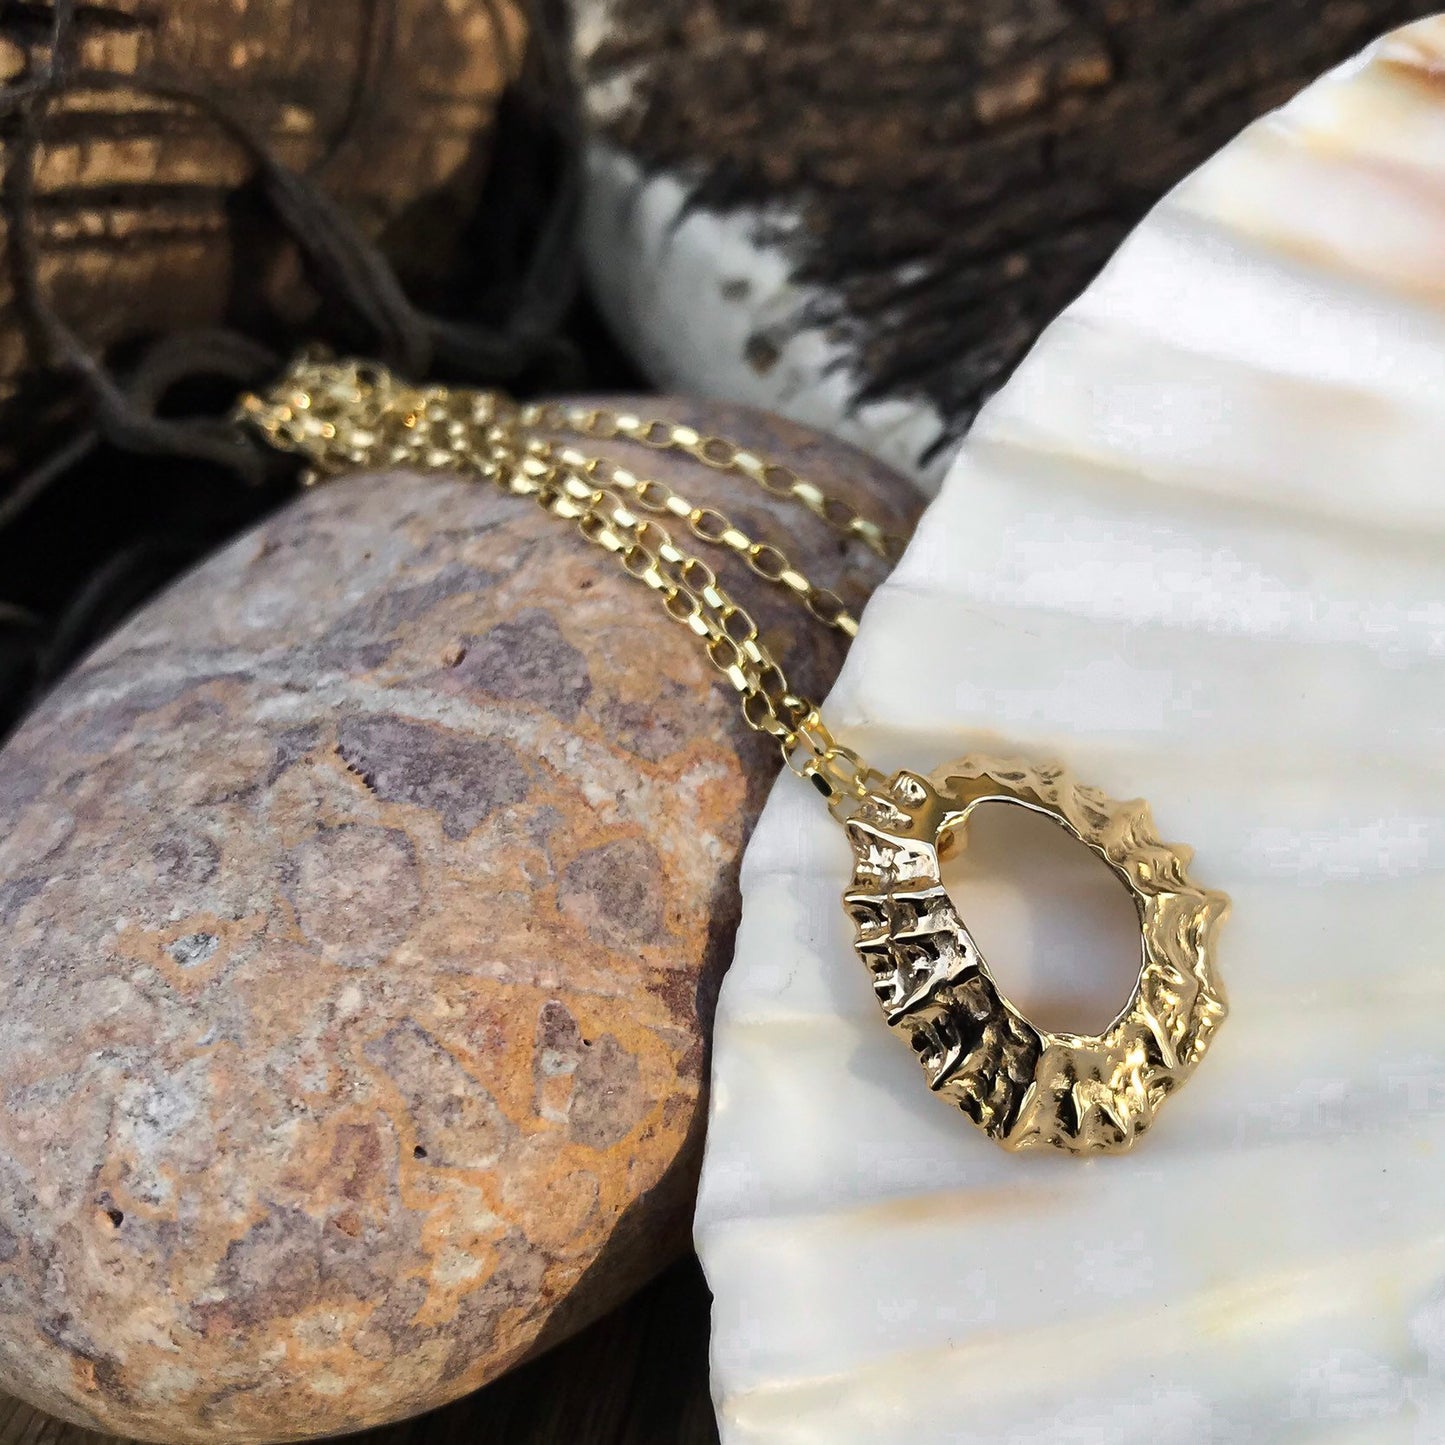 Gold Limpet Shell 'Manx Flitter' Necklace